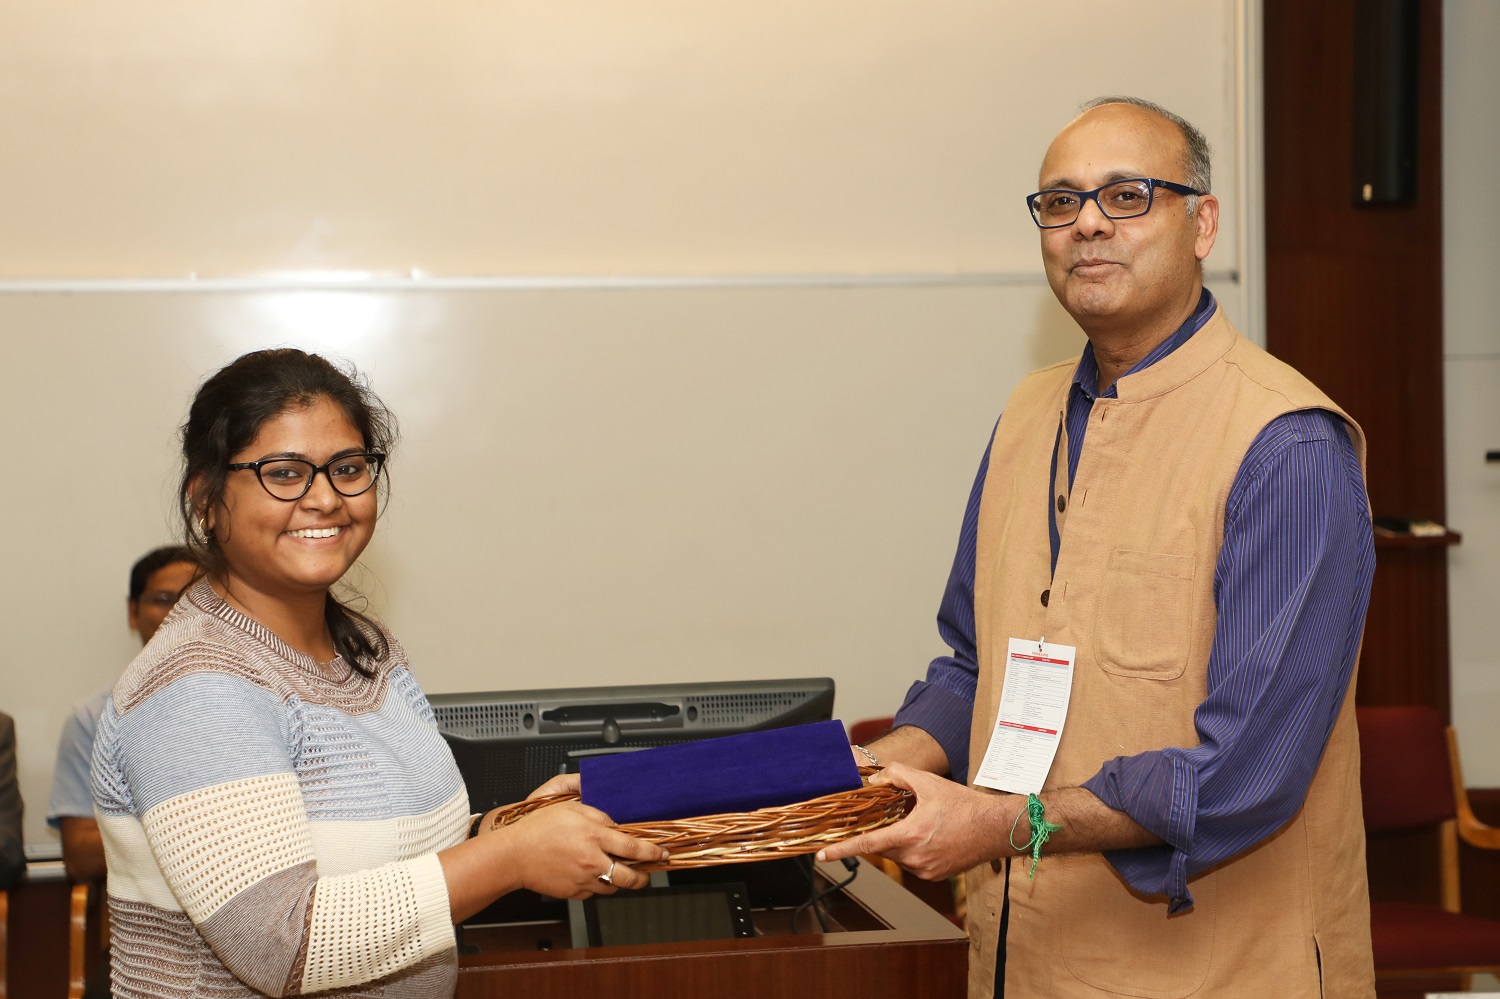 Priyanka Dutta, Indian Statistical Institute, Delhi receives the best paper award for her paper “Public, Private, or a Bit of Both (Mixed)?” during the Awards Presentation at IMRDC 2023.